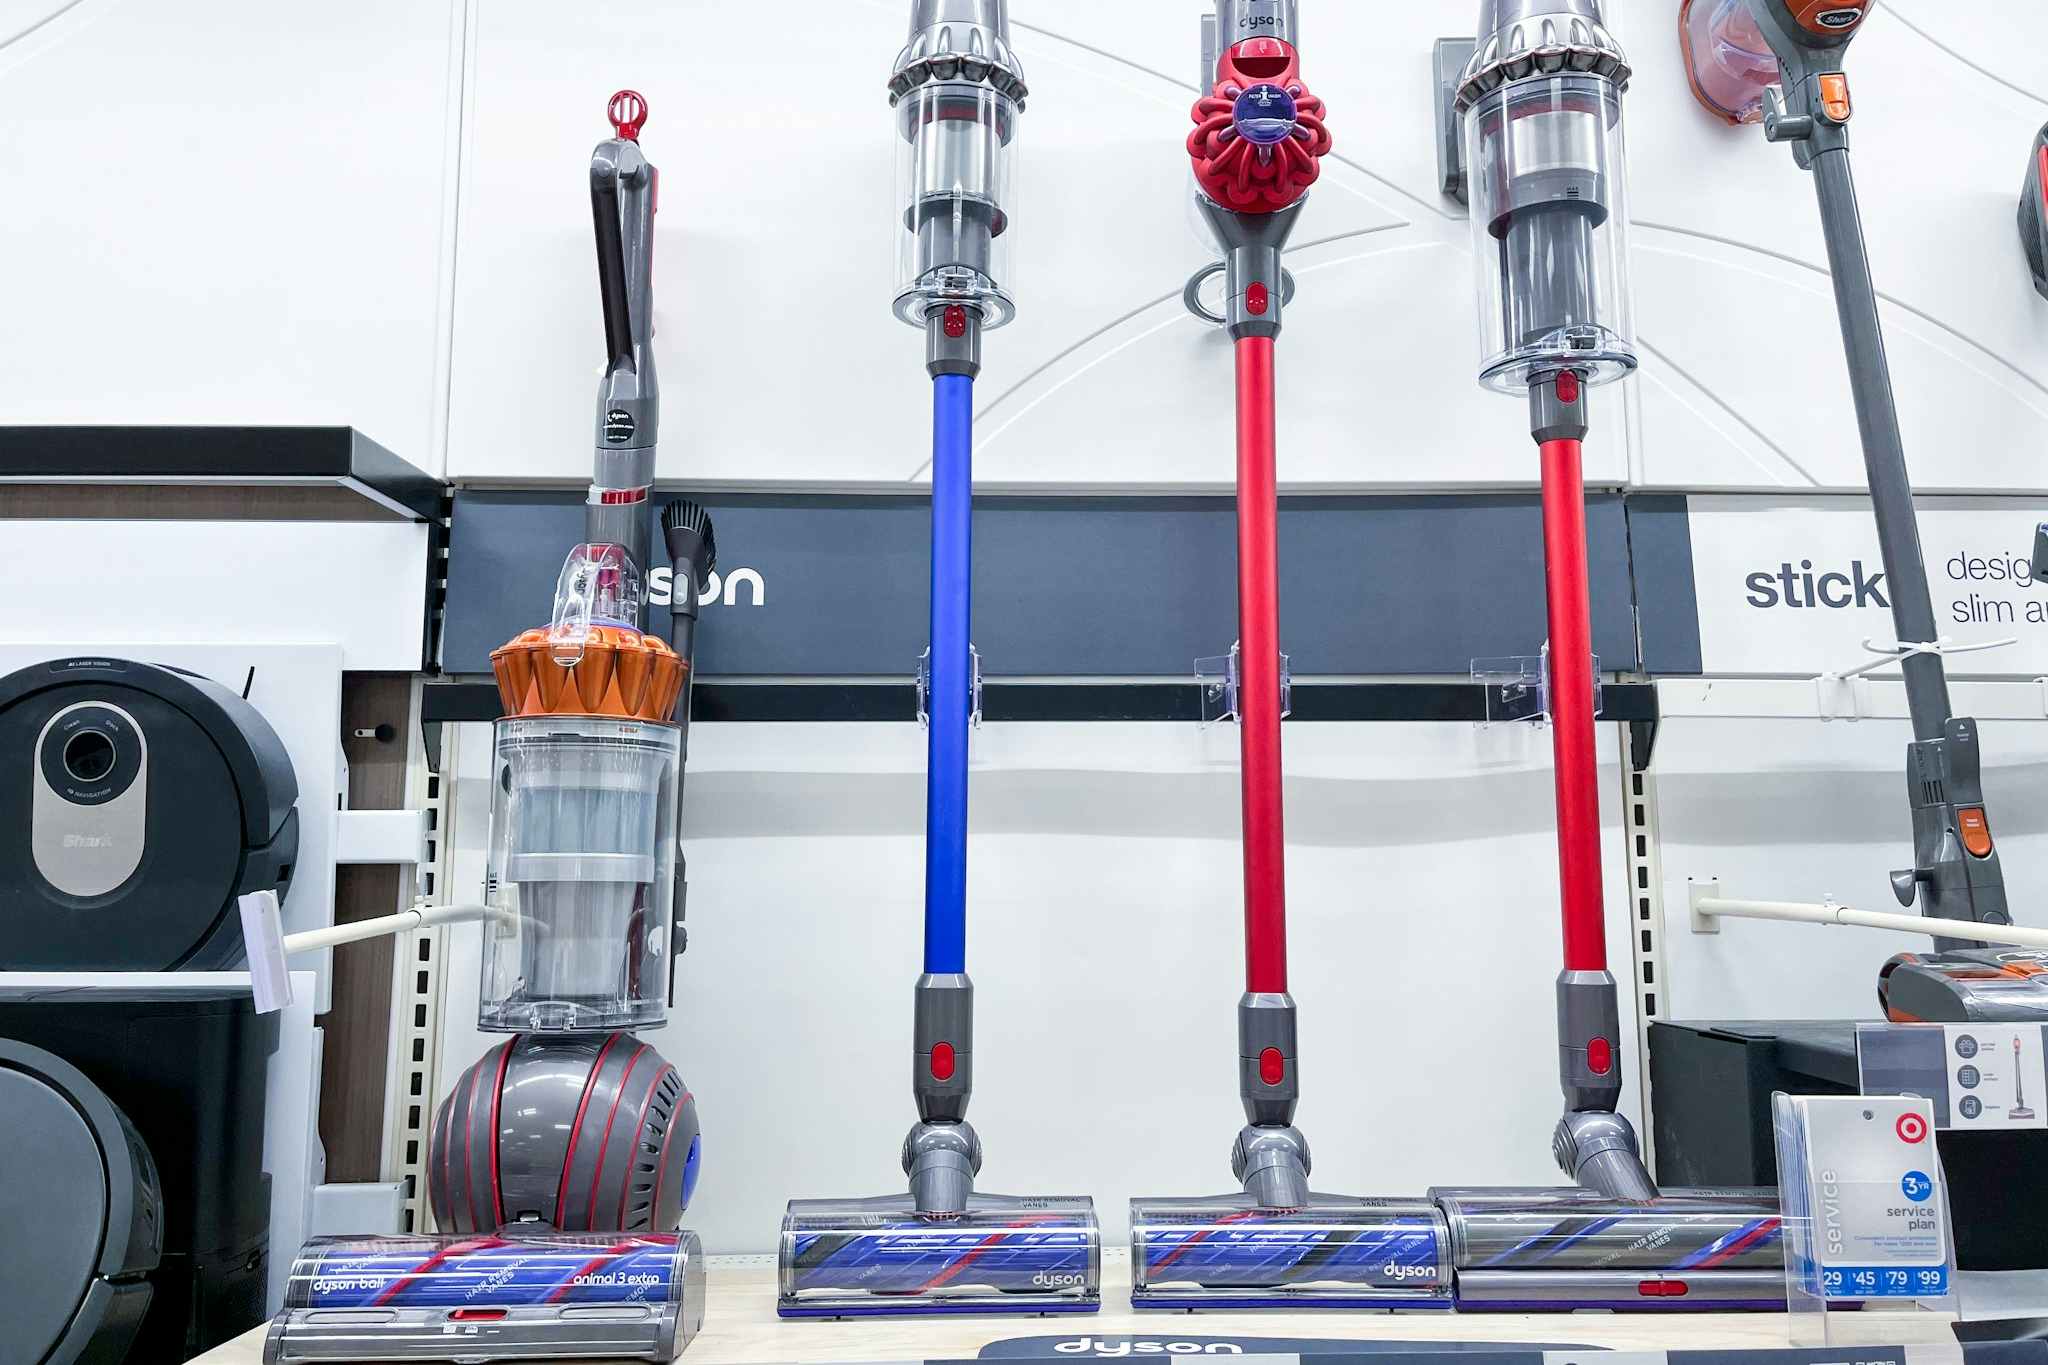 dyson-vacuums-on-display-at-target3